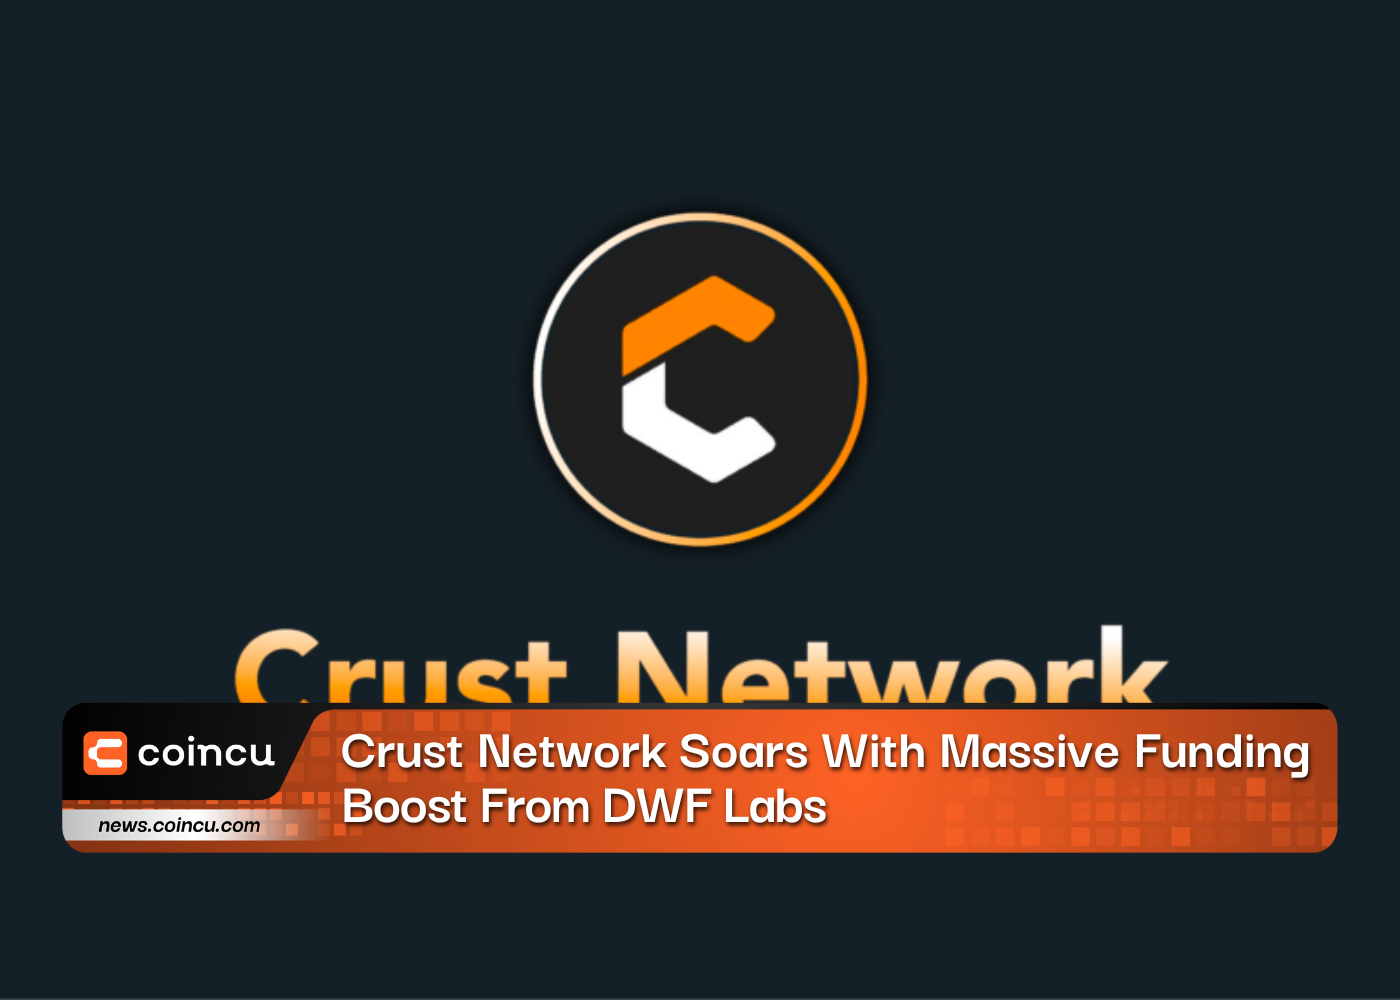 Crust Network Soars With Massive Funding Boost From DWF Labs